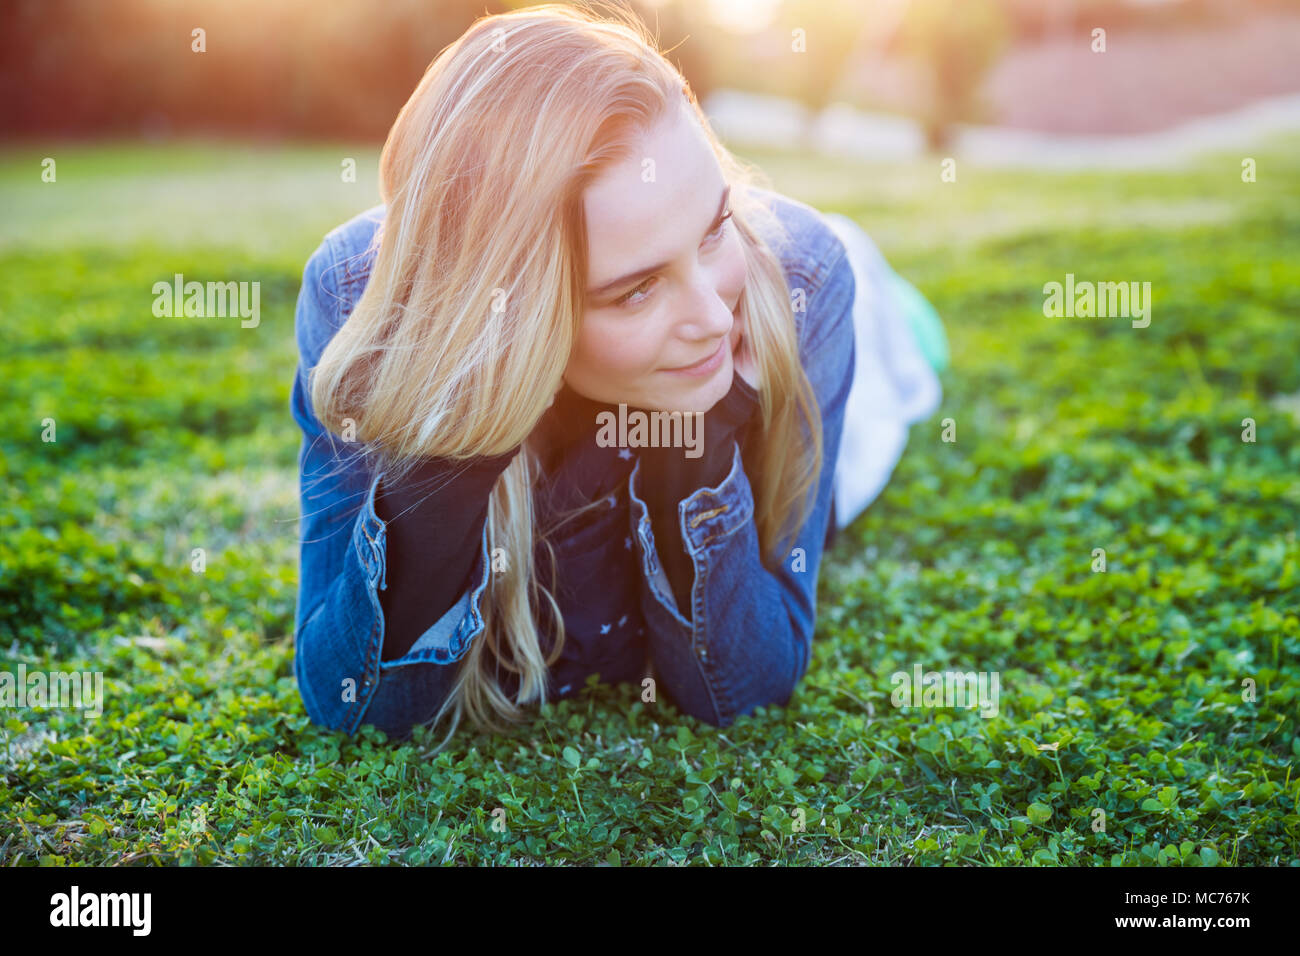 Authentic portrait of a pretty girl lying down on fresh green grass meadow, genuine beauty ofa  young woman, enjoying spring nature and peaceful weeke Stock Photo